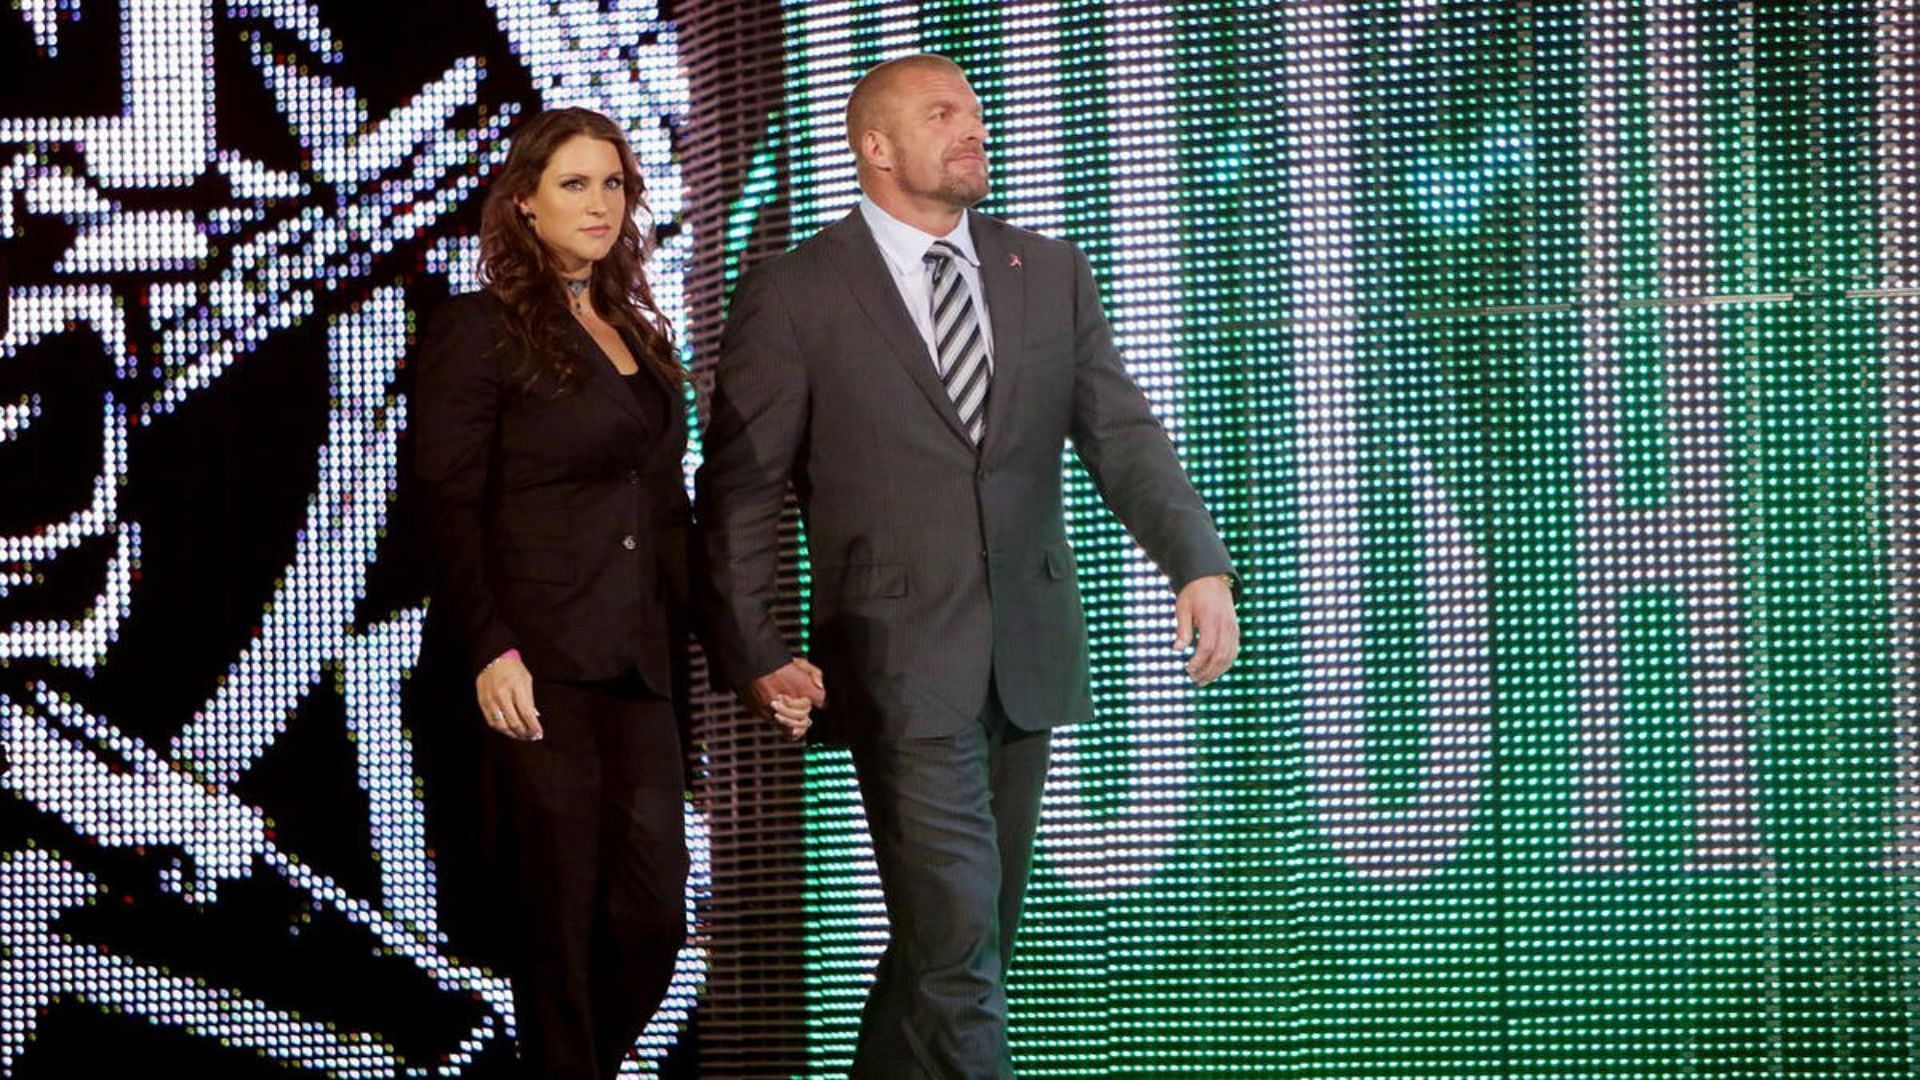 Triple H and Stephanie McMahon have major roles within WWE [Photo courtesy of WWE